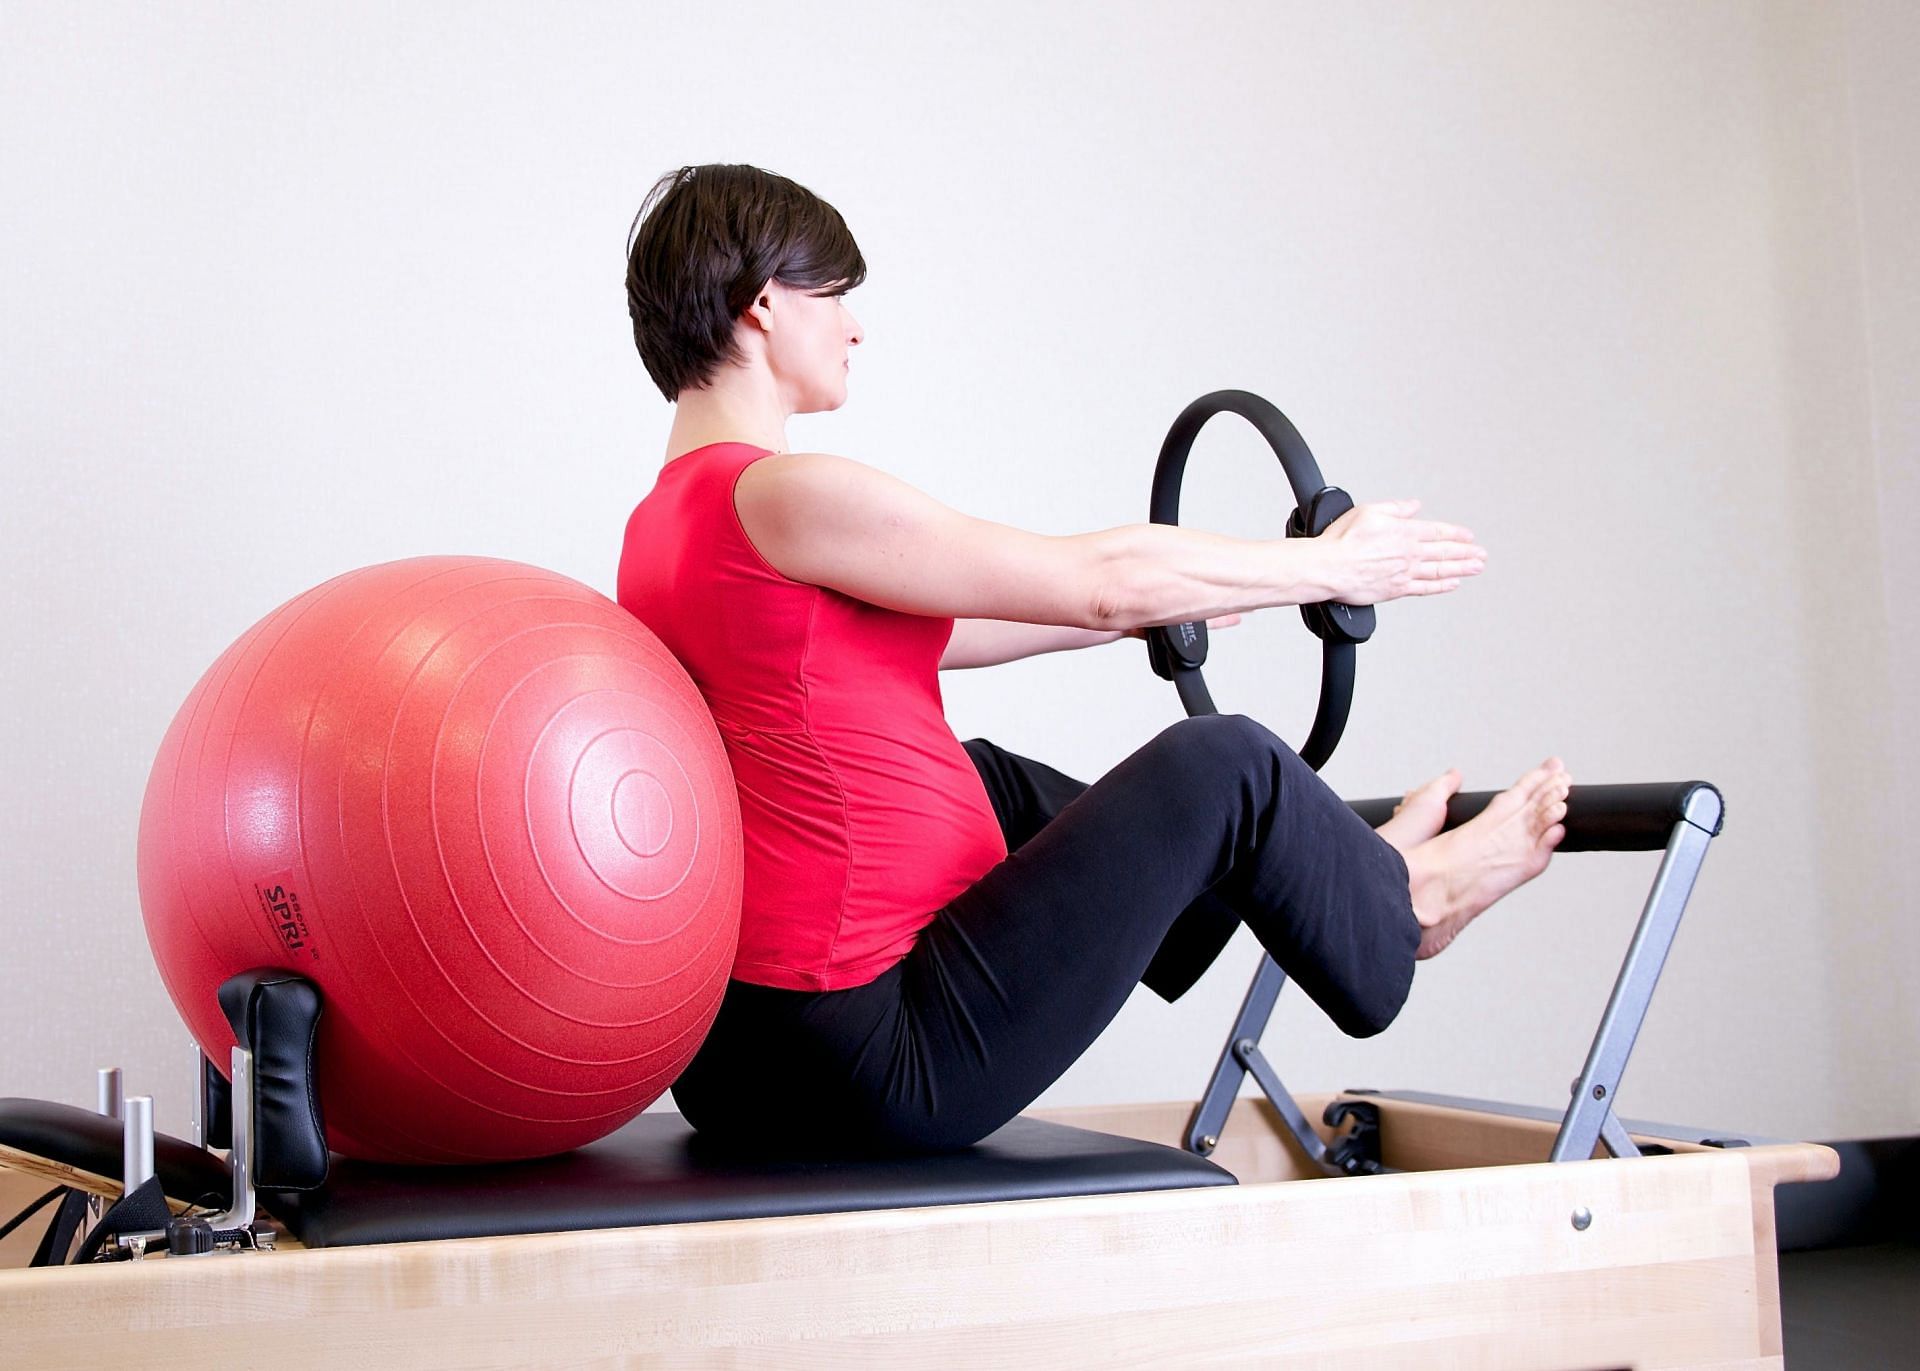 Benefits of wall pilates (image sourced via Pexels / Photo by jessica)